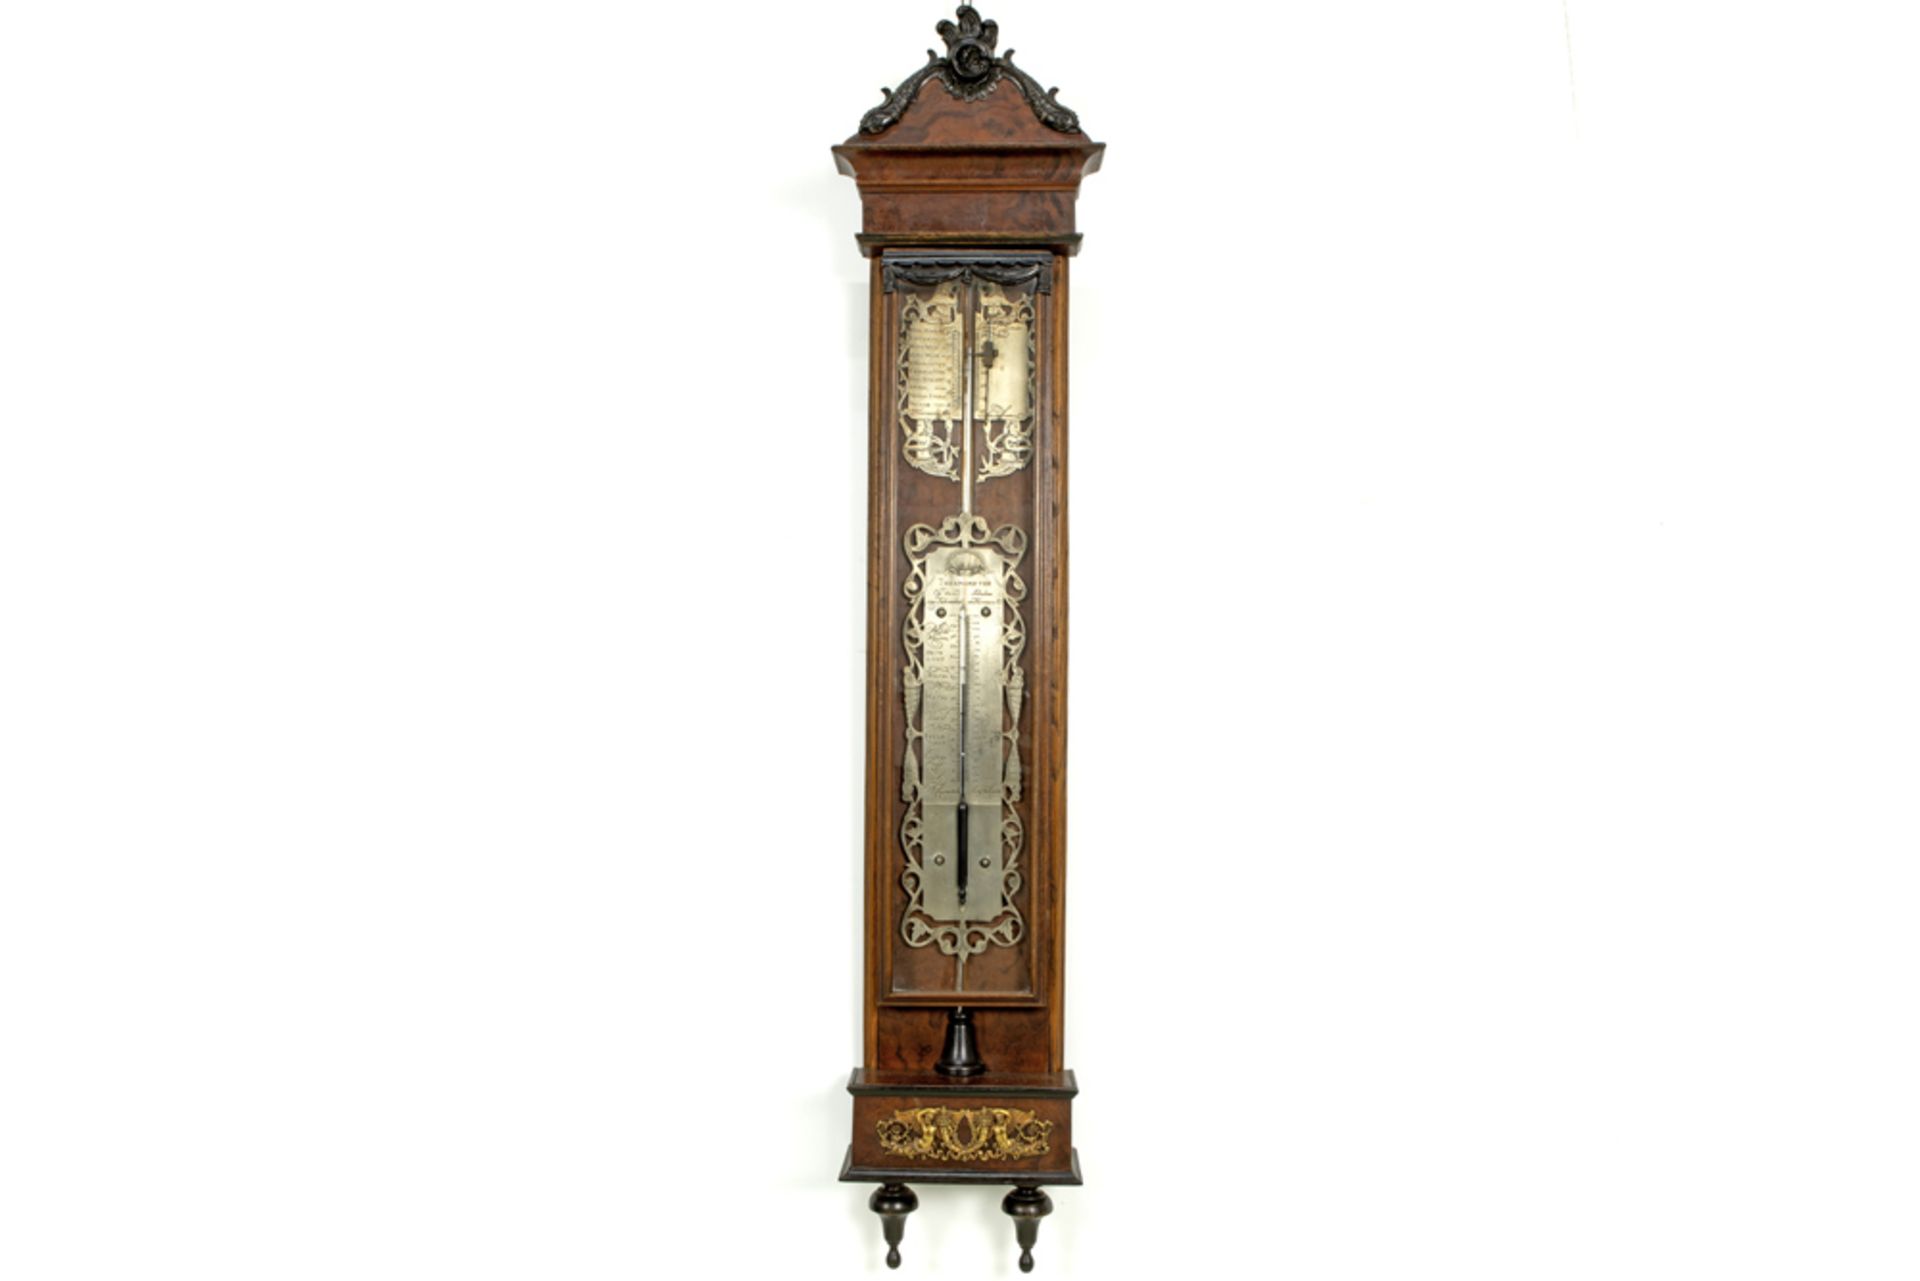 19th Cent. Dutch barometer with a case in burr of walnut, ebonized wood and walnut with Empire style